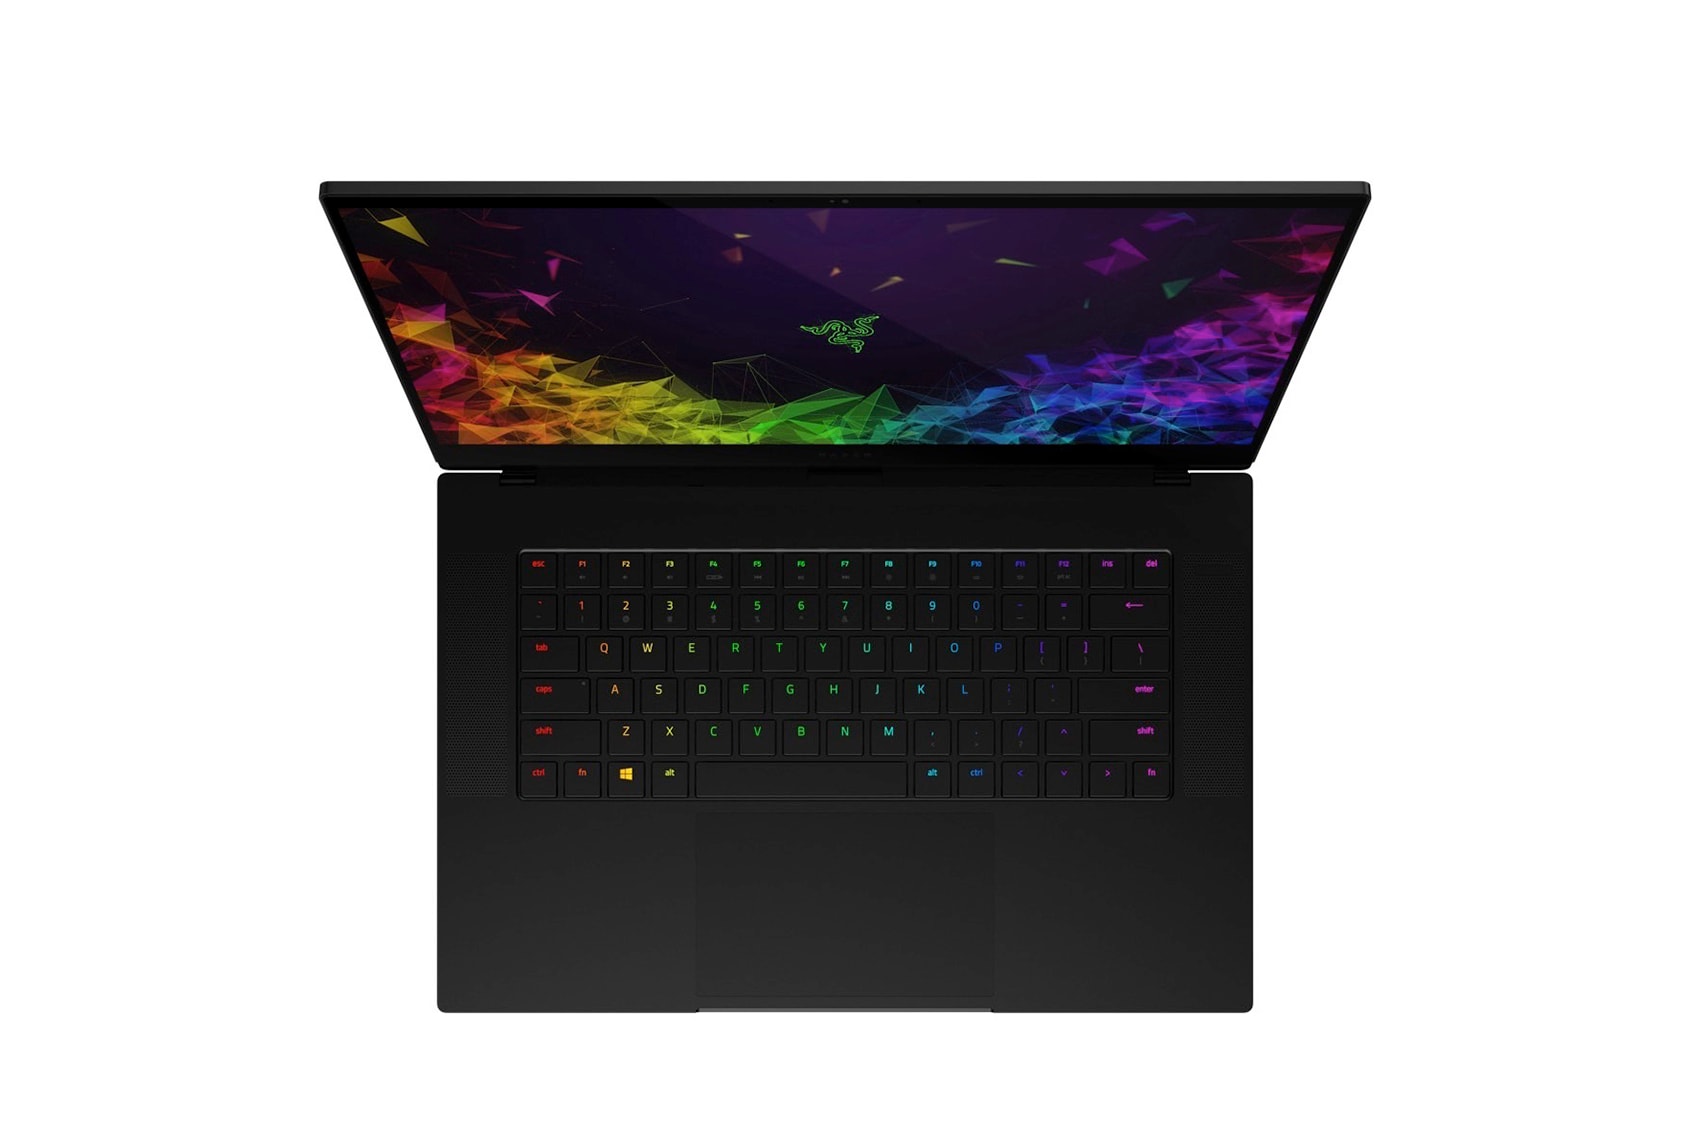 Razer Blade 2018 Gaming Laptop Fortnite Battle Royale 15.6 Inch Screen 4.9mm Thin Bezels 144hz Full HD Refresh Rate 100% sRGB Adobe RGB Support 4K Touch Display